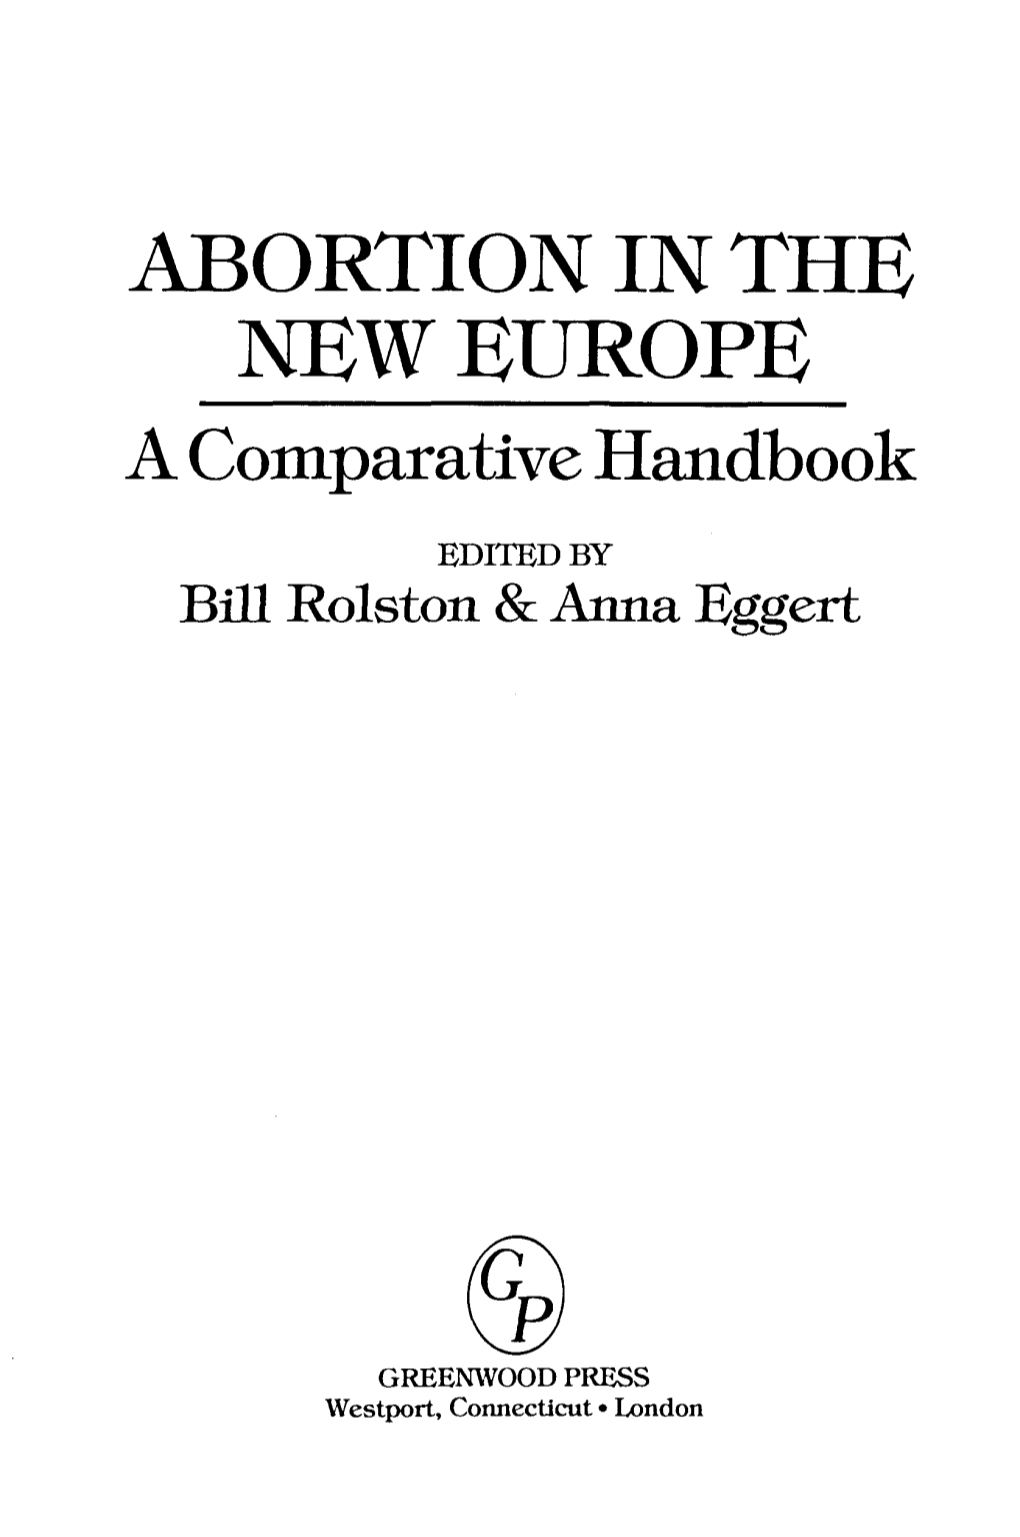 ABORTION in the NEW EUROPE a Comparative Handbook